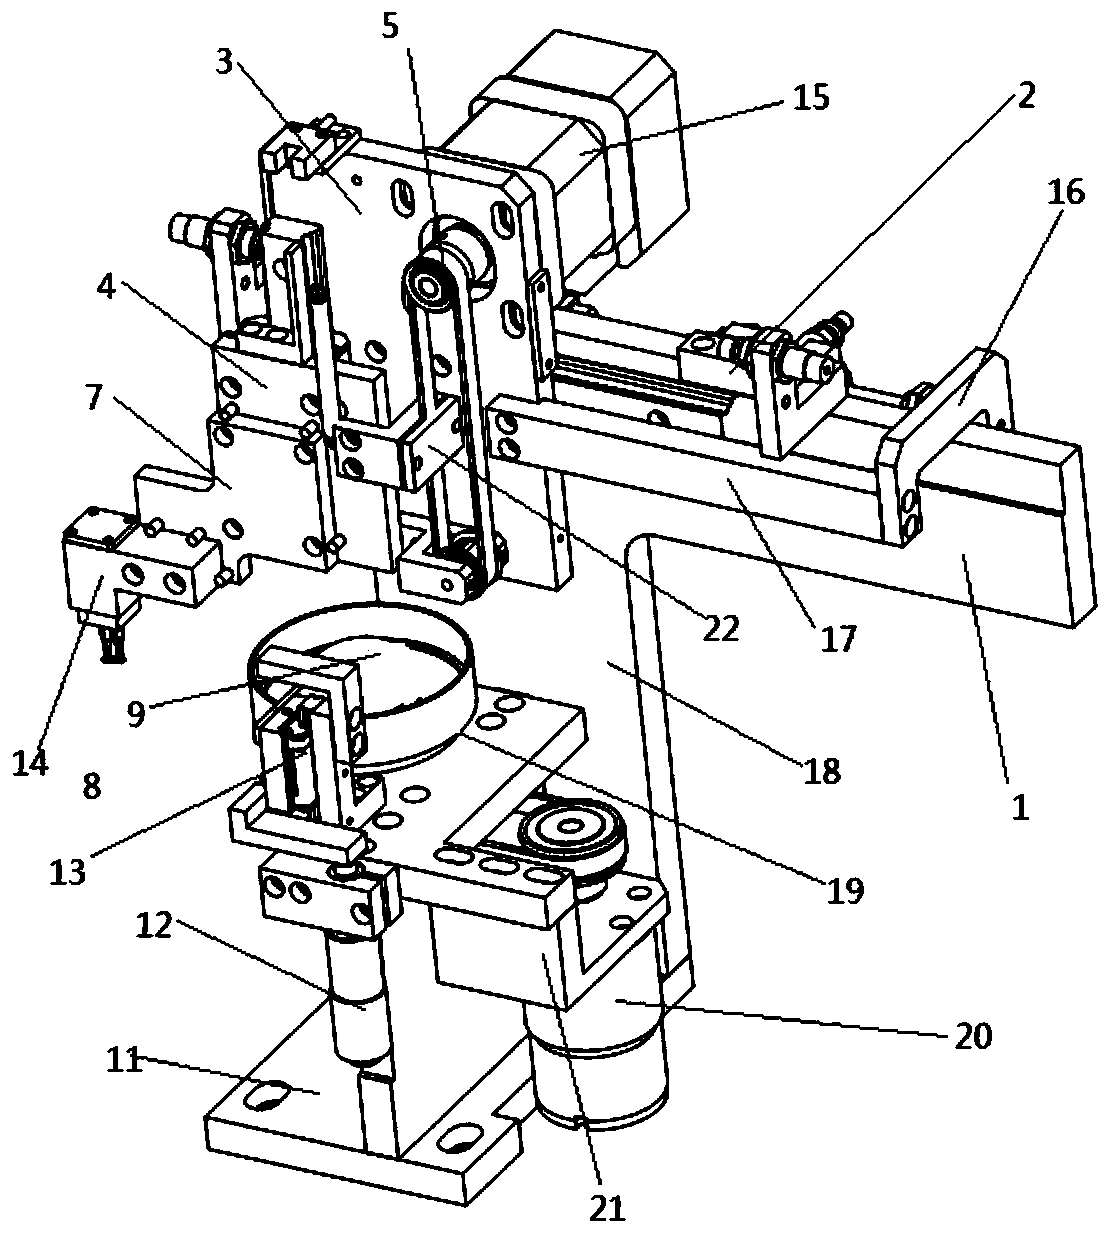 Electric automobile hub grinding device